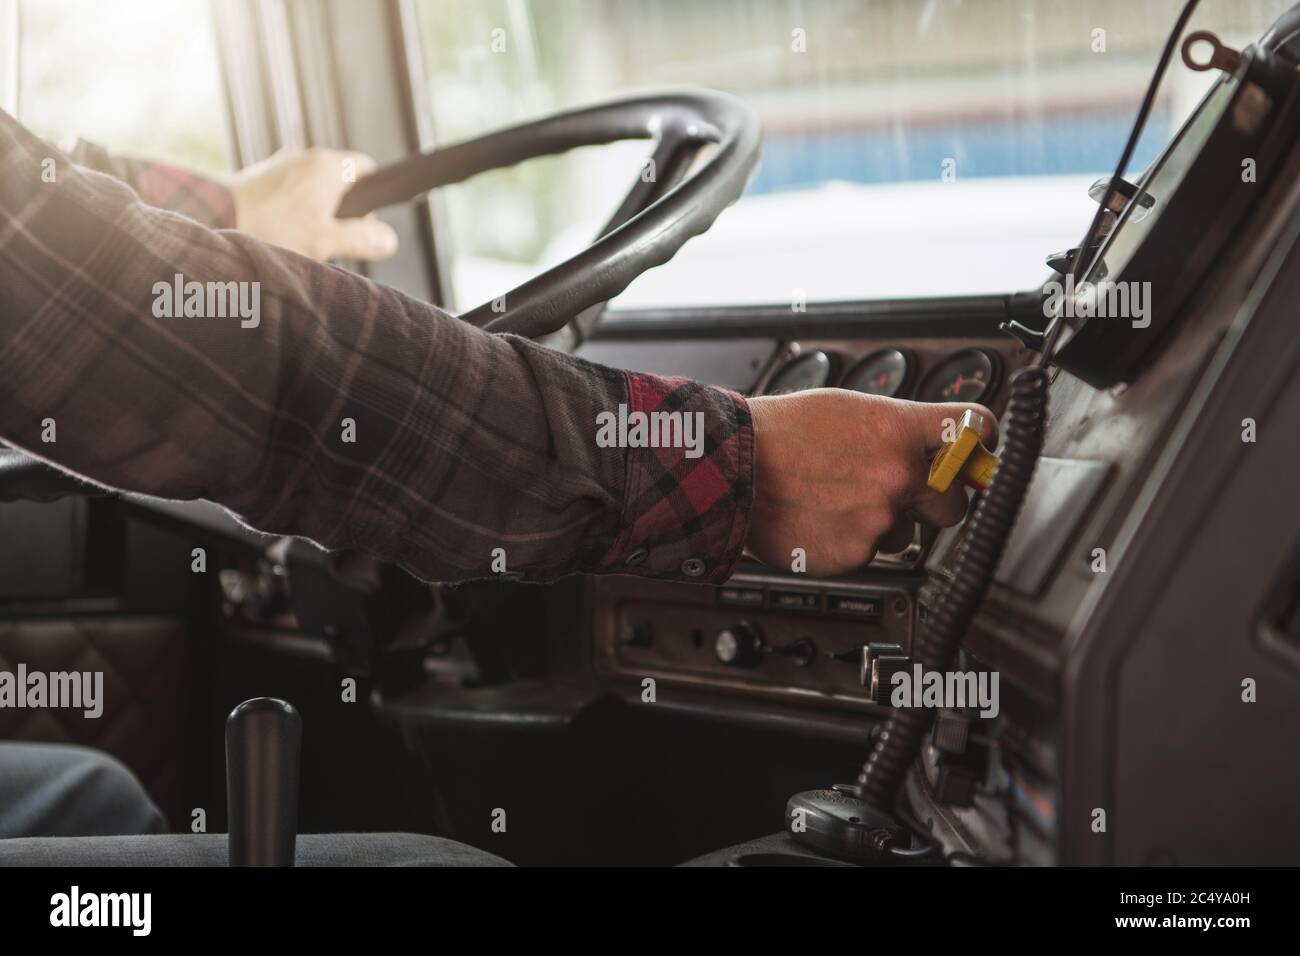 Semi Truck Male Driver Inside Of Vehicle Behind Steering Wheel. Transportation Industry Concept. Stock Photo